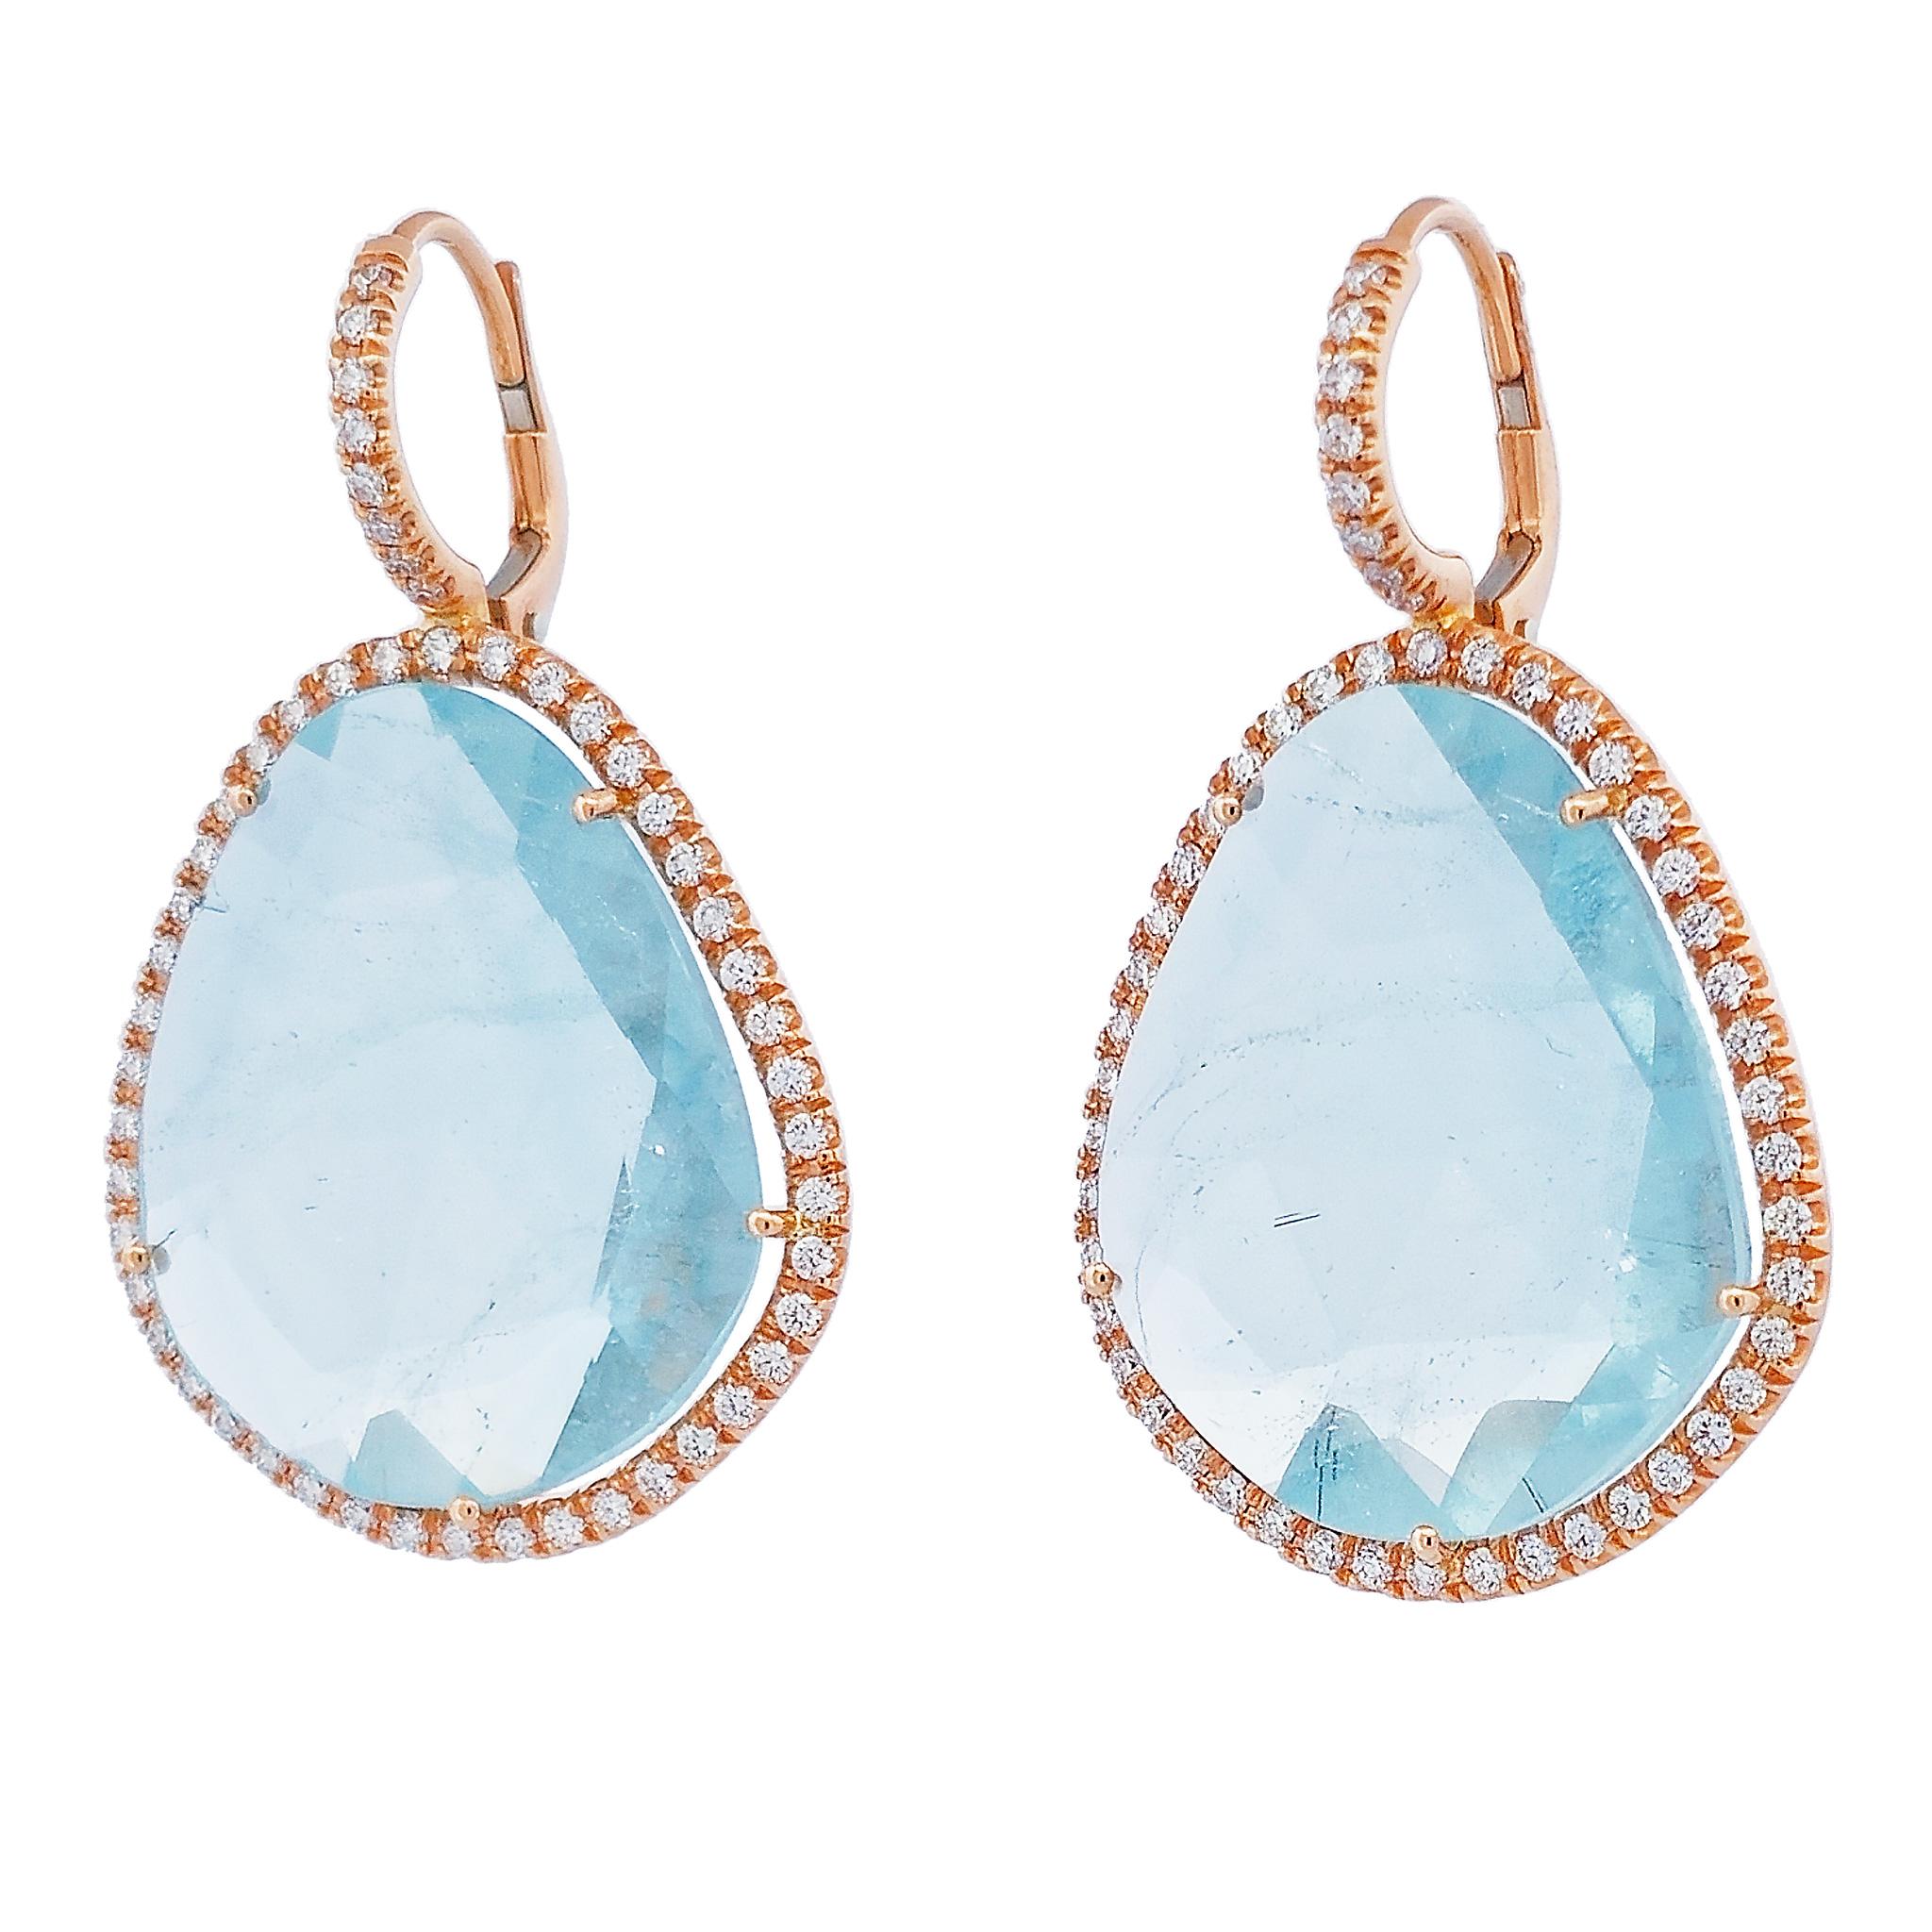 Handmade Blue Topaz Slice Diamond Pave Rose Gold Drop Earrings In New Condition For Sale In Miami, FL